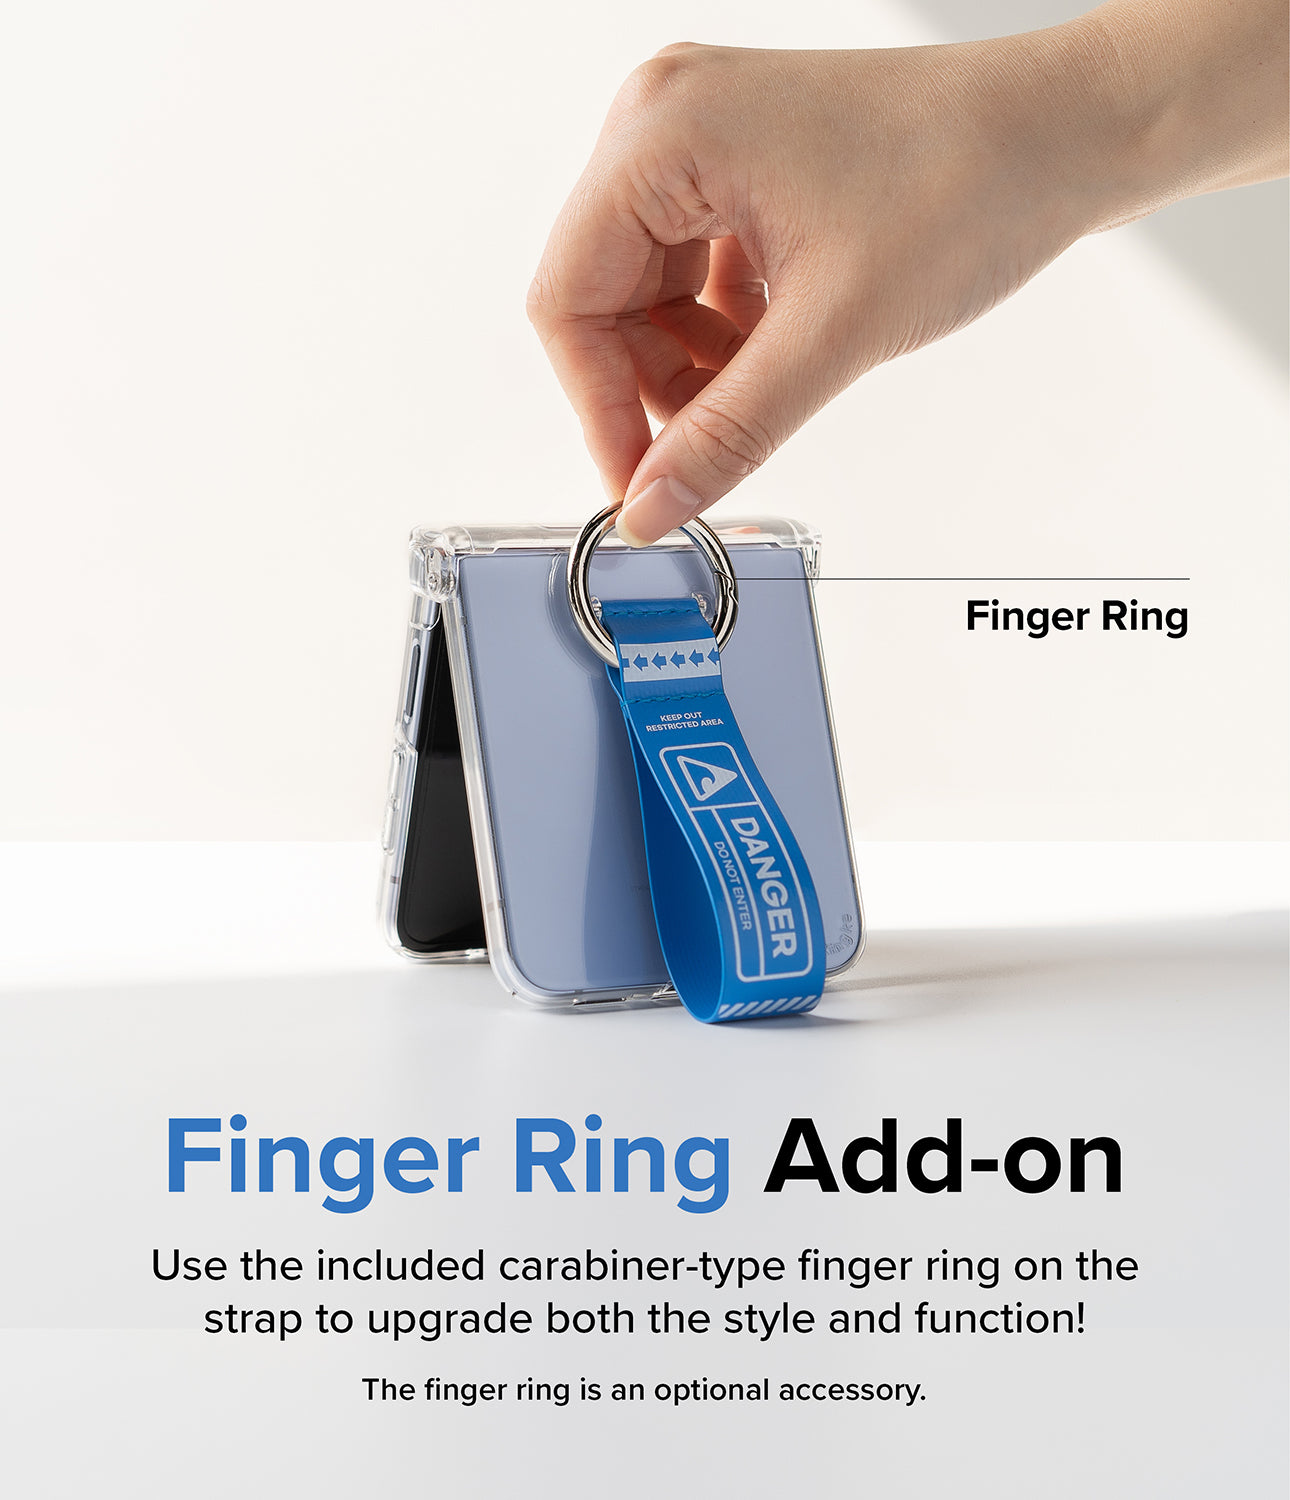 Use the included carabiner-type finger ring on the strap